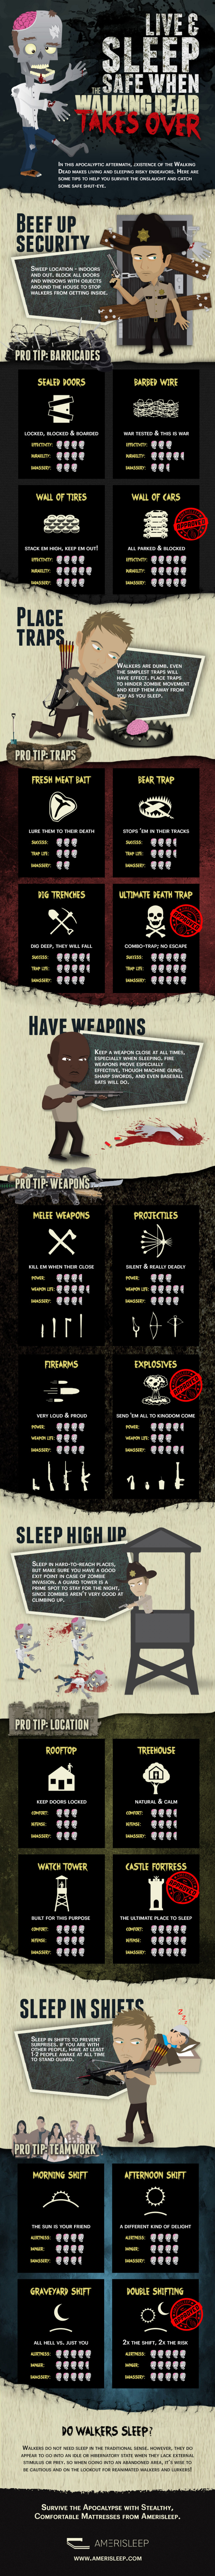 Live & Sleep Safe When The Walking Dead Takes Over Infographic